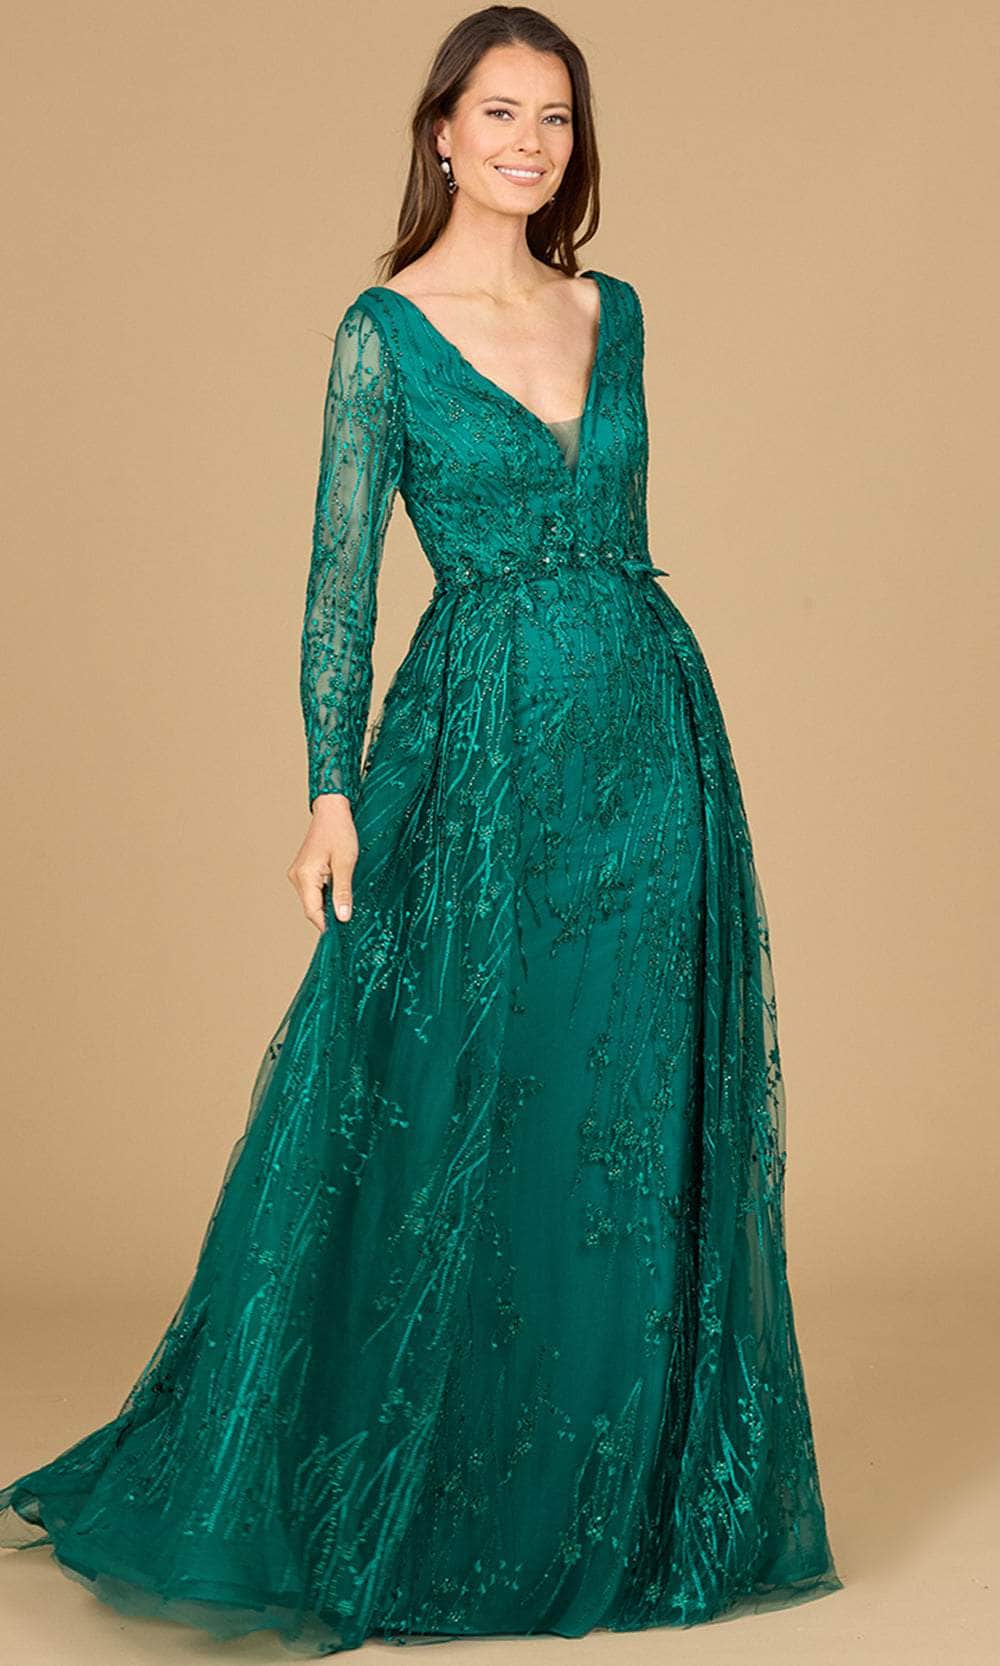 Lara Dresses 29139 - Long Sleeve Lace Evening Gown
